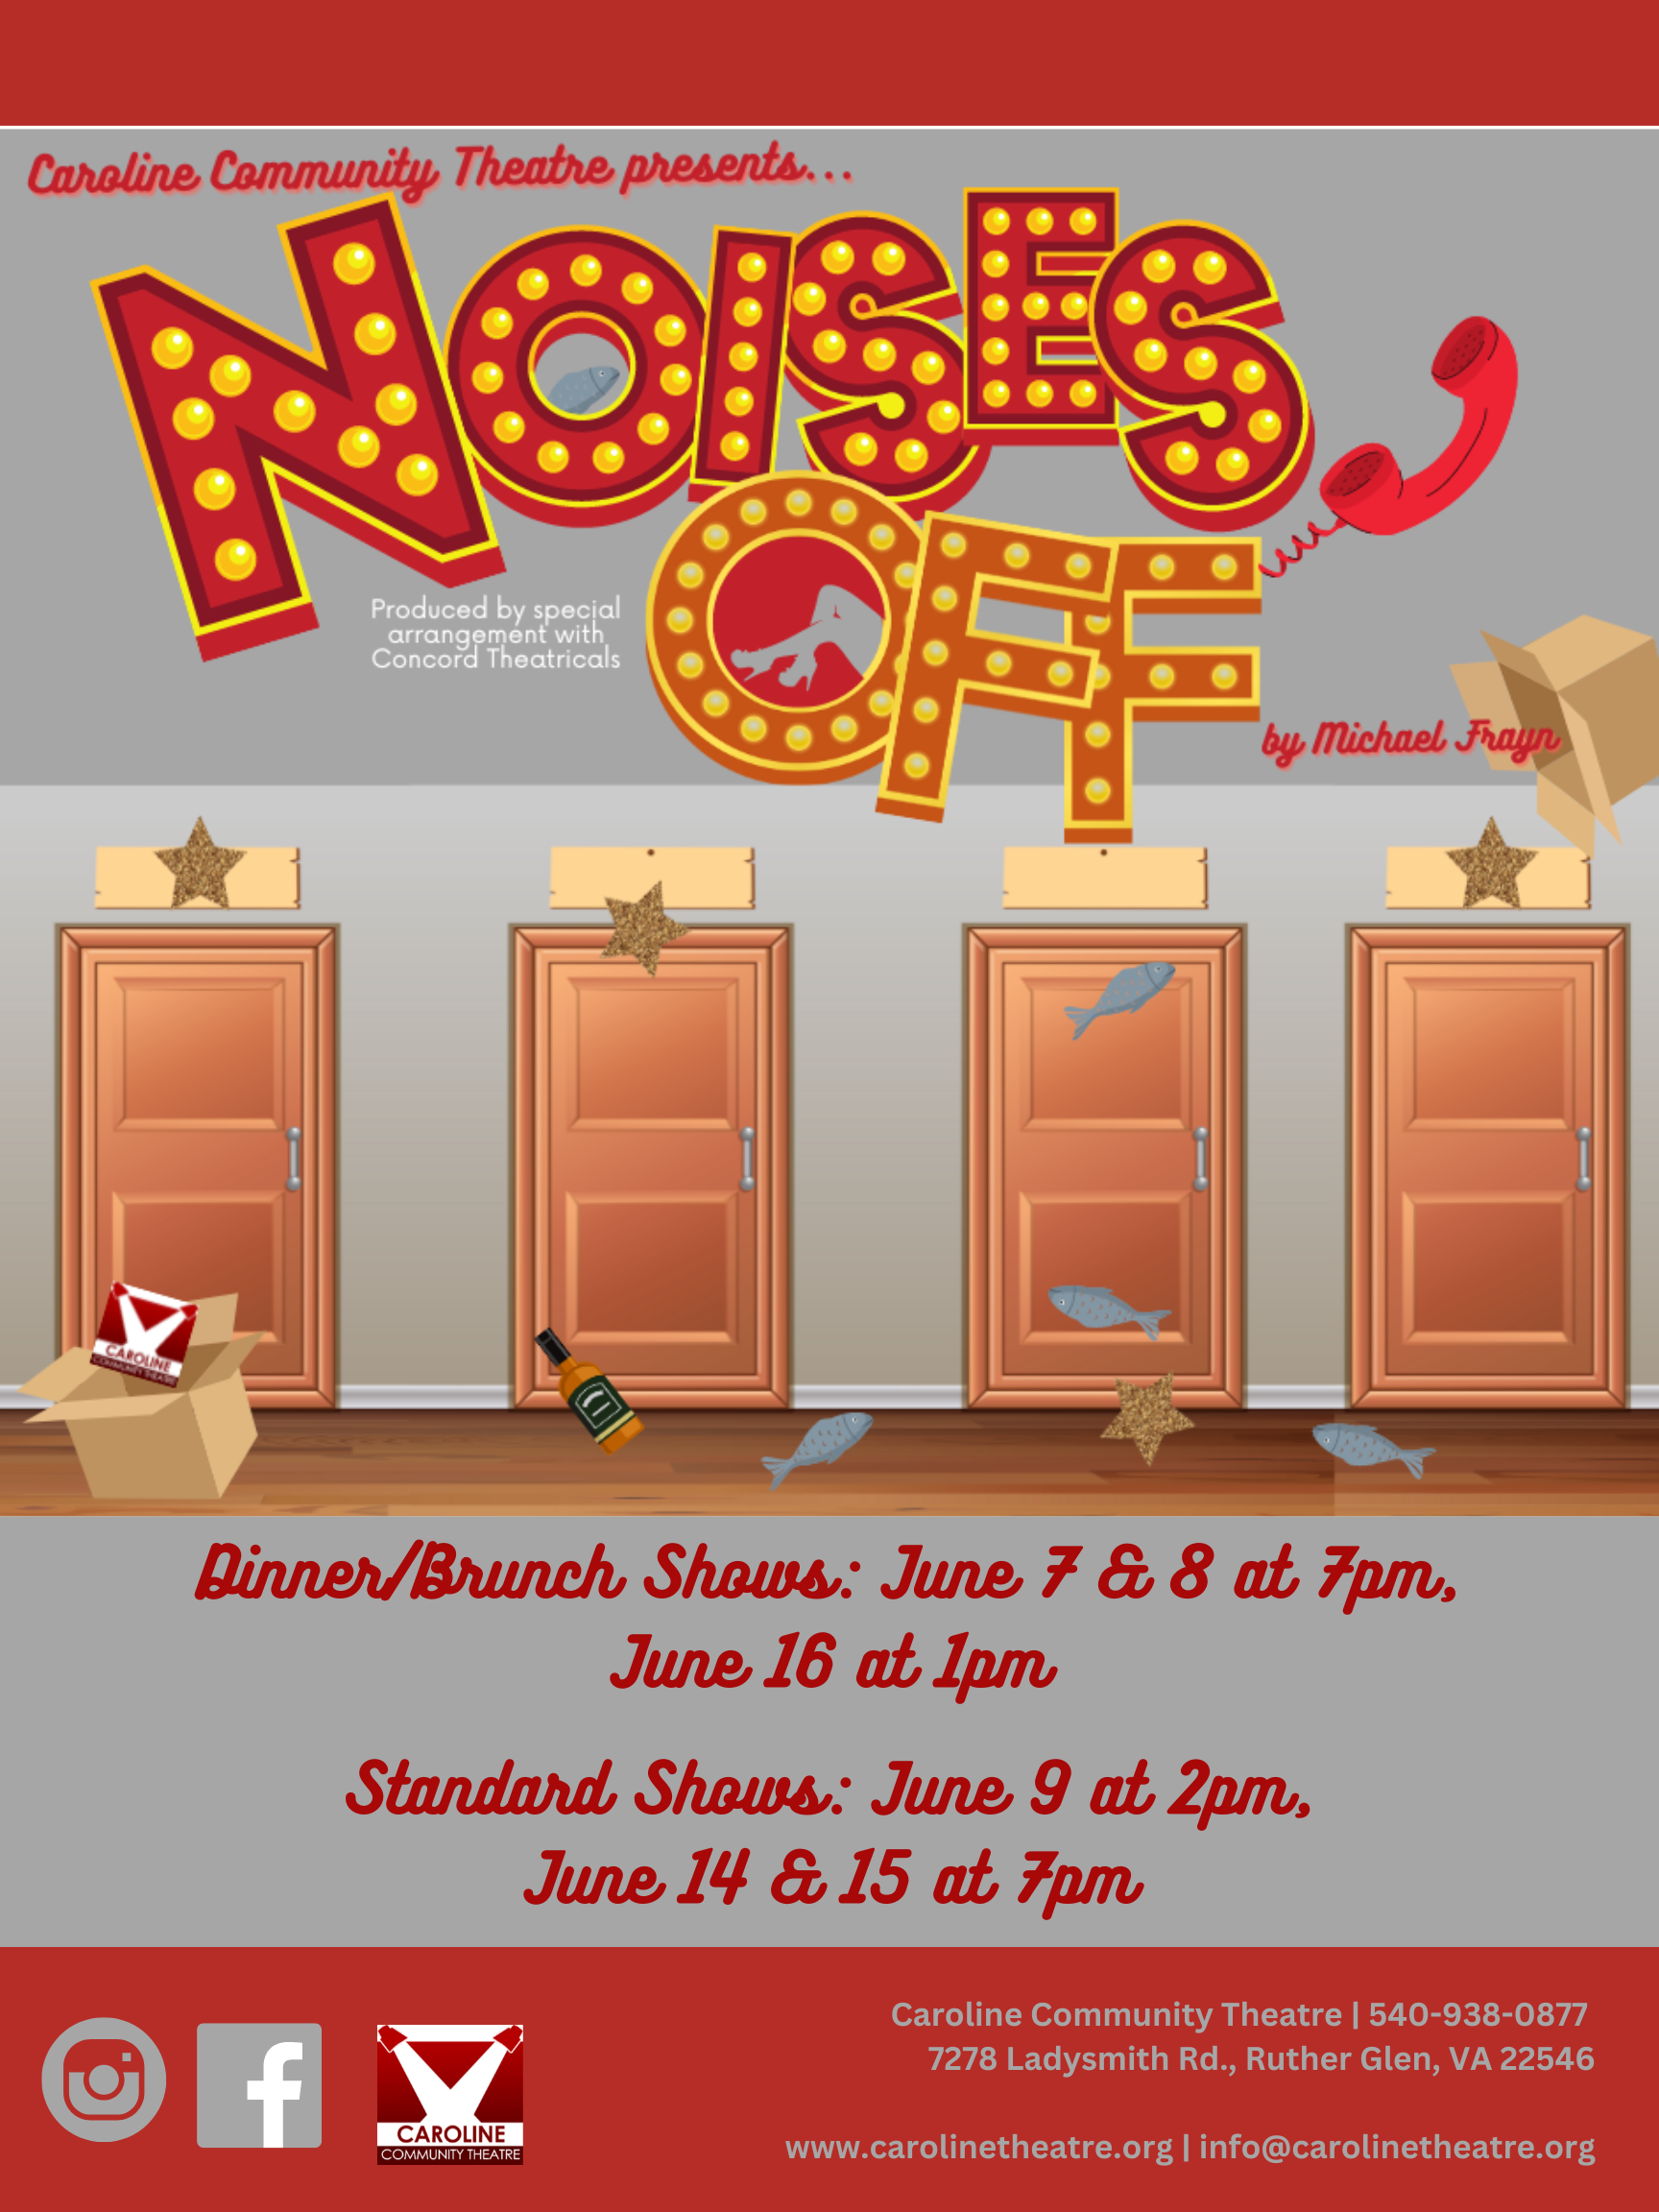 <h1 class="tribe-events-single-event-title">Audition Announcement for Caroline Community Theatre’s production of NOISES OFF</h1>